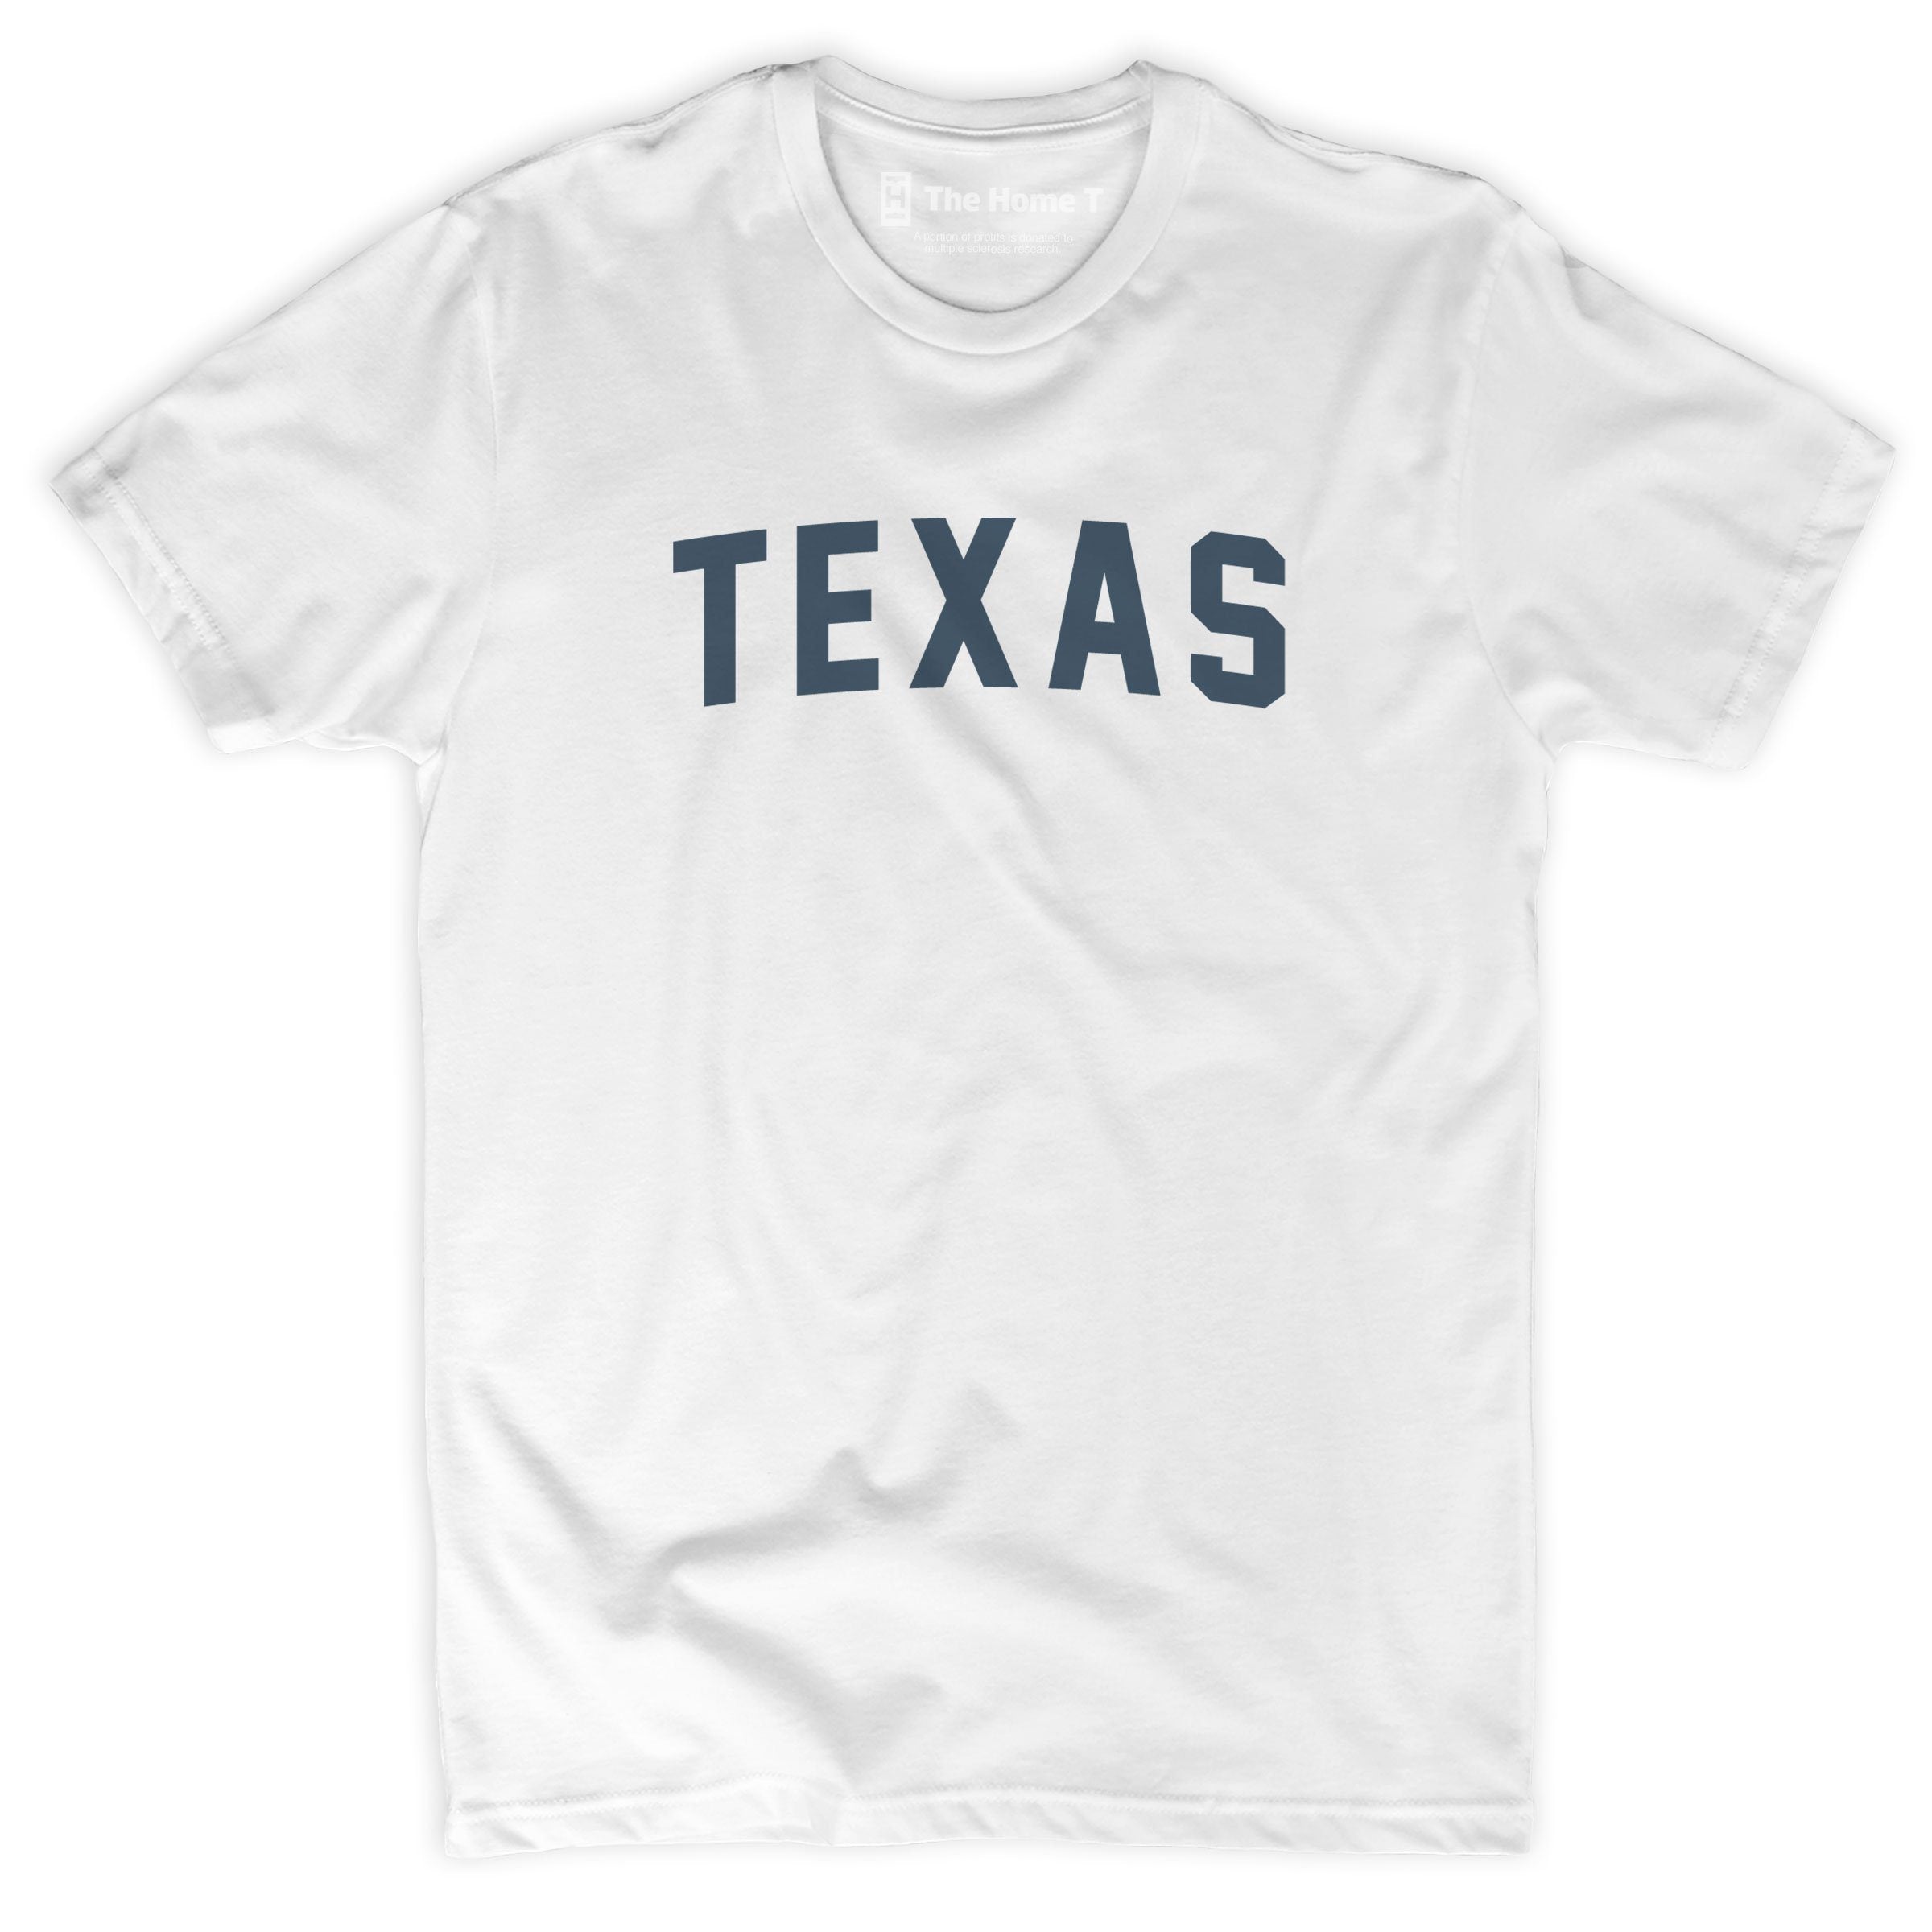 Texas Arched Shirt